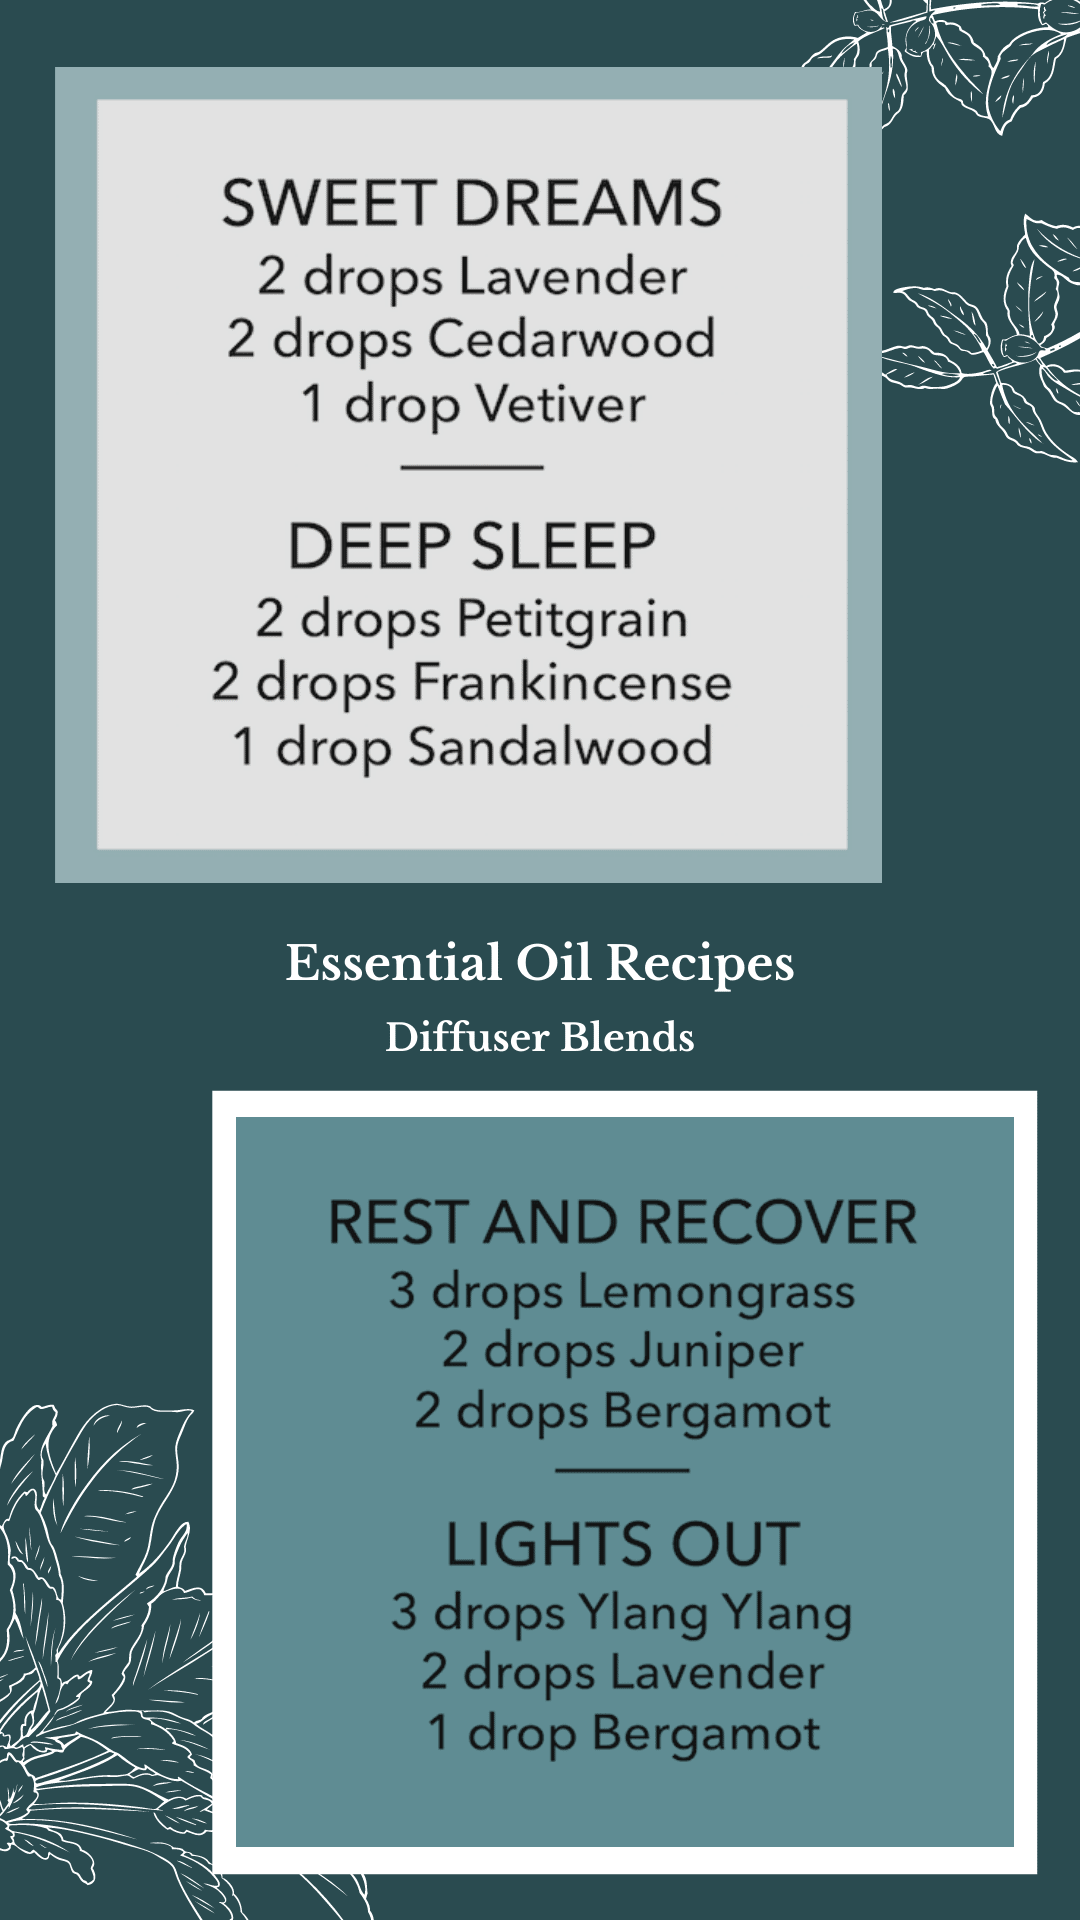 Essential Oil Diffuser Blend Recipes To Help With Sleep or Insomnia